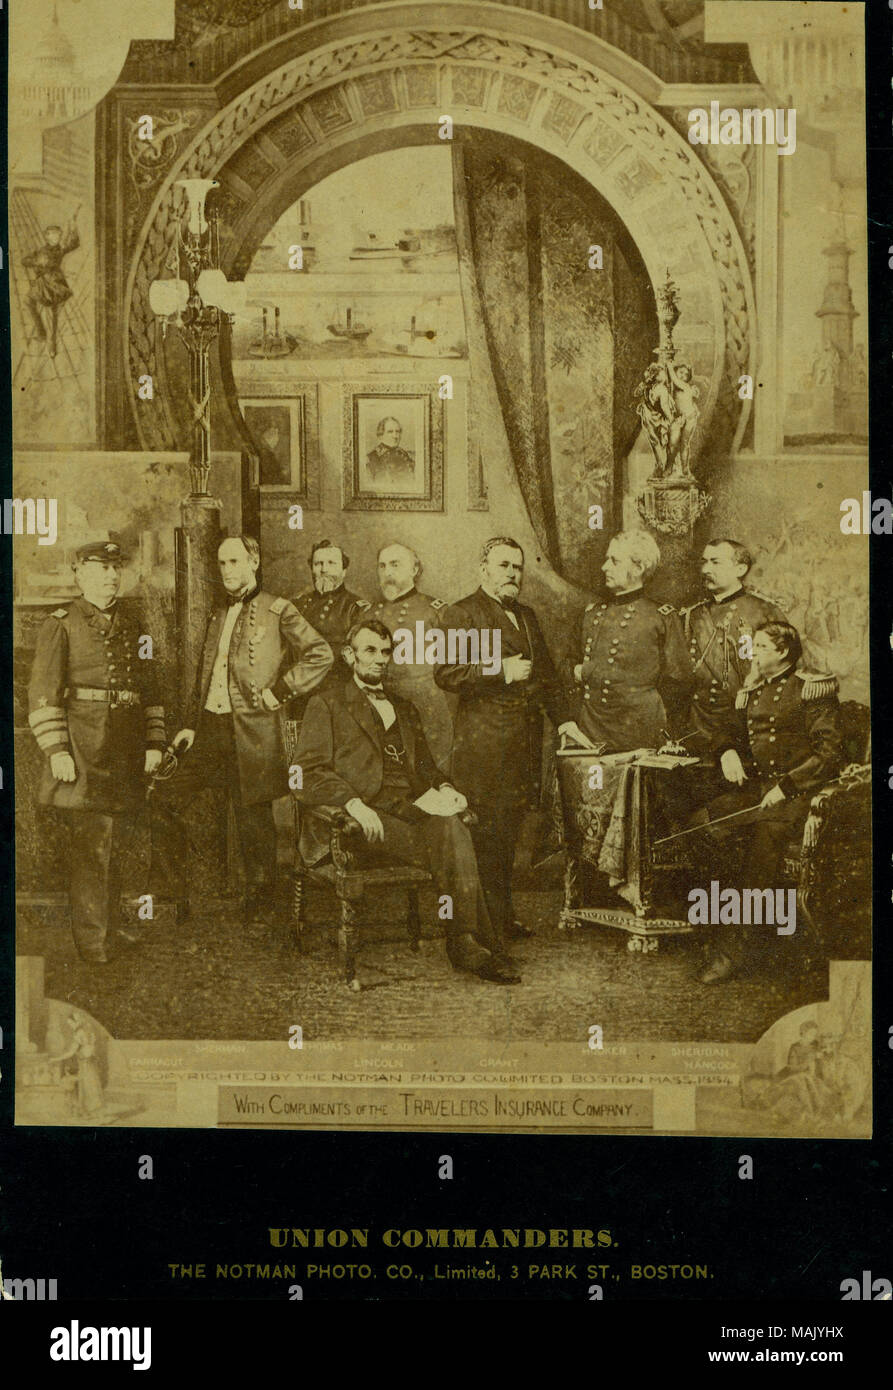 Print of President Lincoln in chair in the foreground surrounded by Union military officers. Grant's image appears to be taken from a later photograph from his presidency. In the background are smaller images of the capital, naval battles, portraits, and monuments. Names of individuals are printed below corresponding image. Printed Below Image: 'With Compliments Of The Travelers Insurance Company.' Title: 'Union Commanders.' (L to R: Farragut, Sherman, Thomas, Lincoln, Meade, Grant, Hooker, Sheridan, Hancock).  . 1884. The Notman Photo Co., Boston Stock Photo